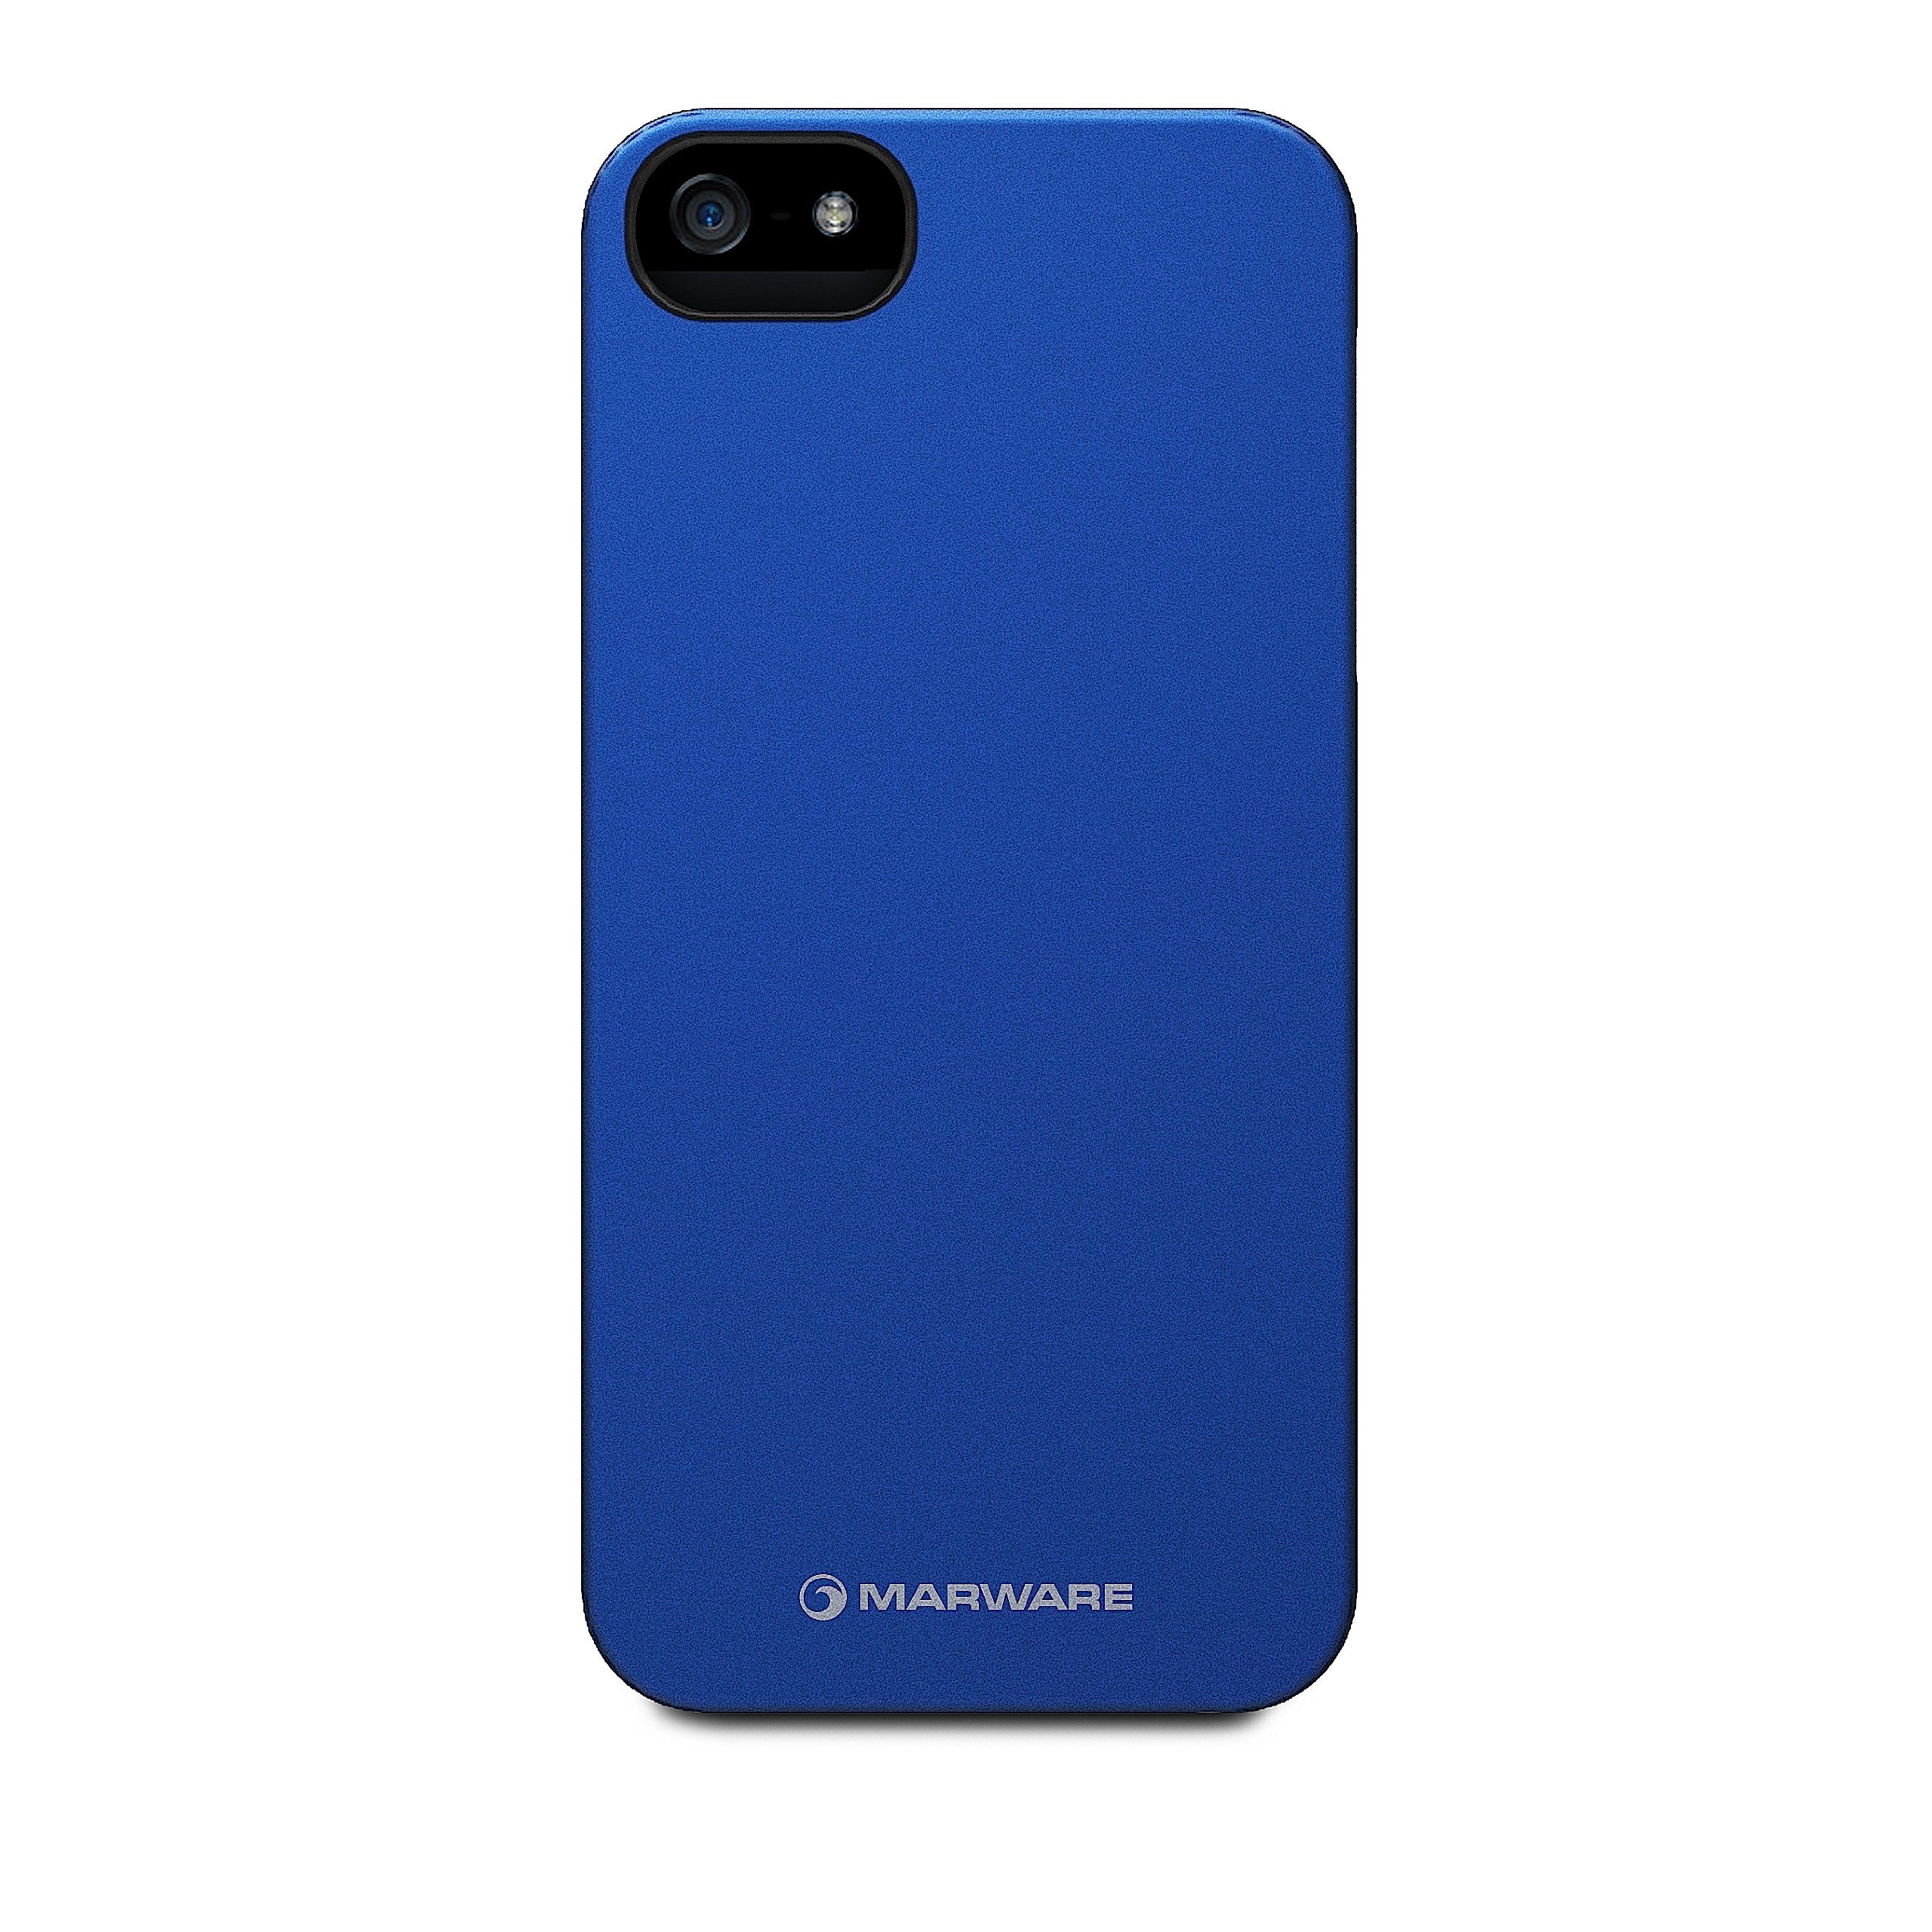 Marware ADMS1016 Microshell Case for iPhone 5 - 1 Pack - Retail Packaging - Blue - image 1 of 2